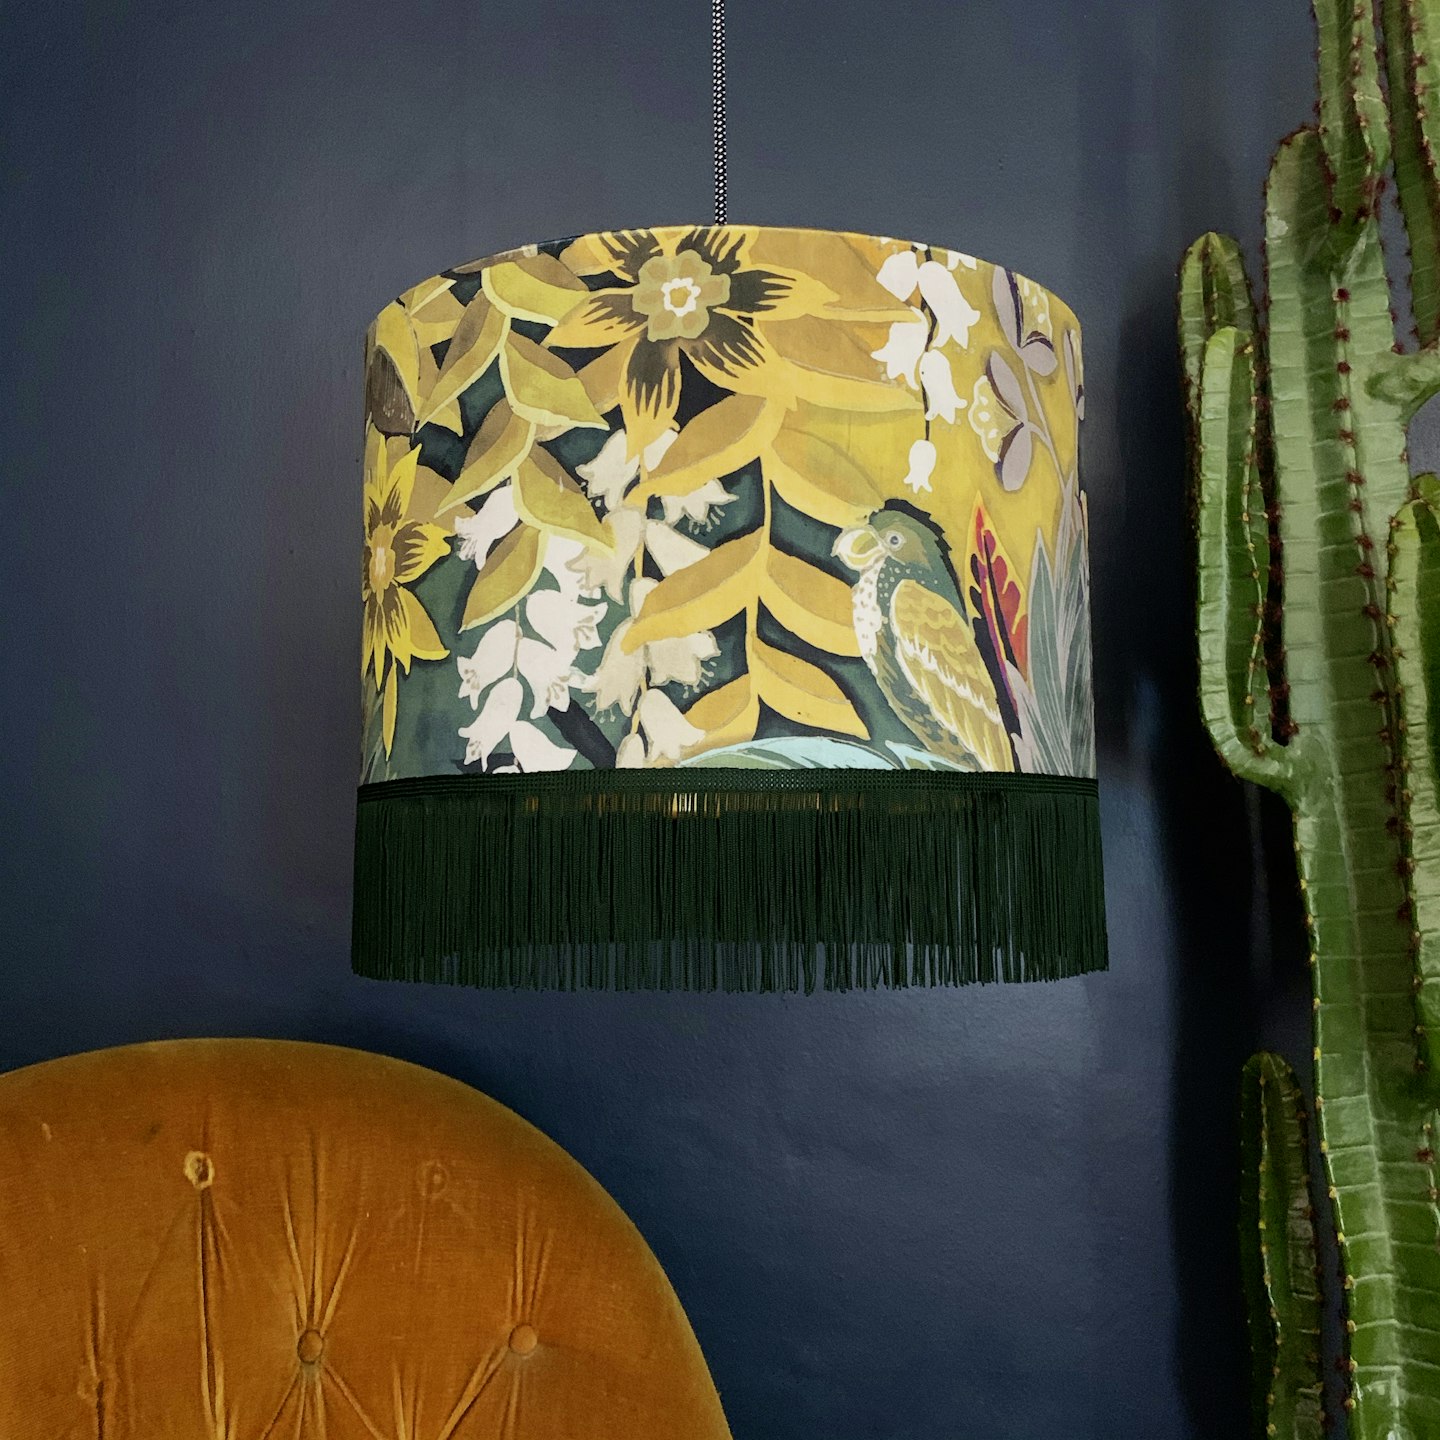 Switch up your lampshade